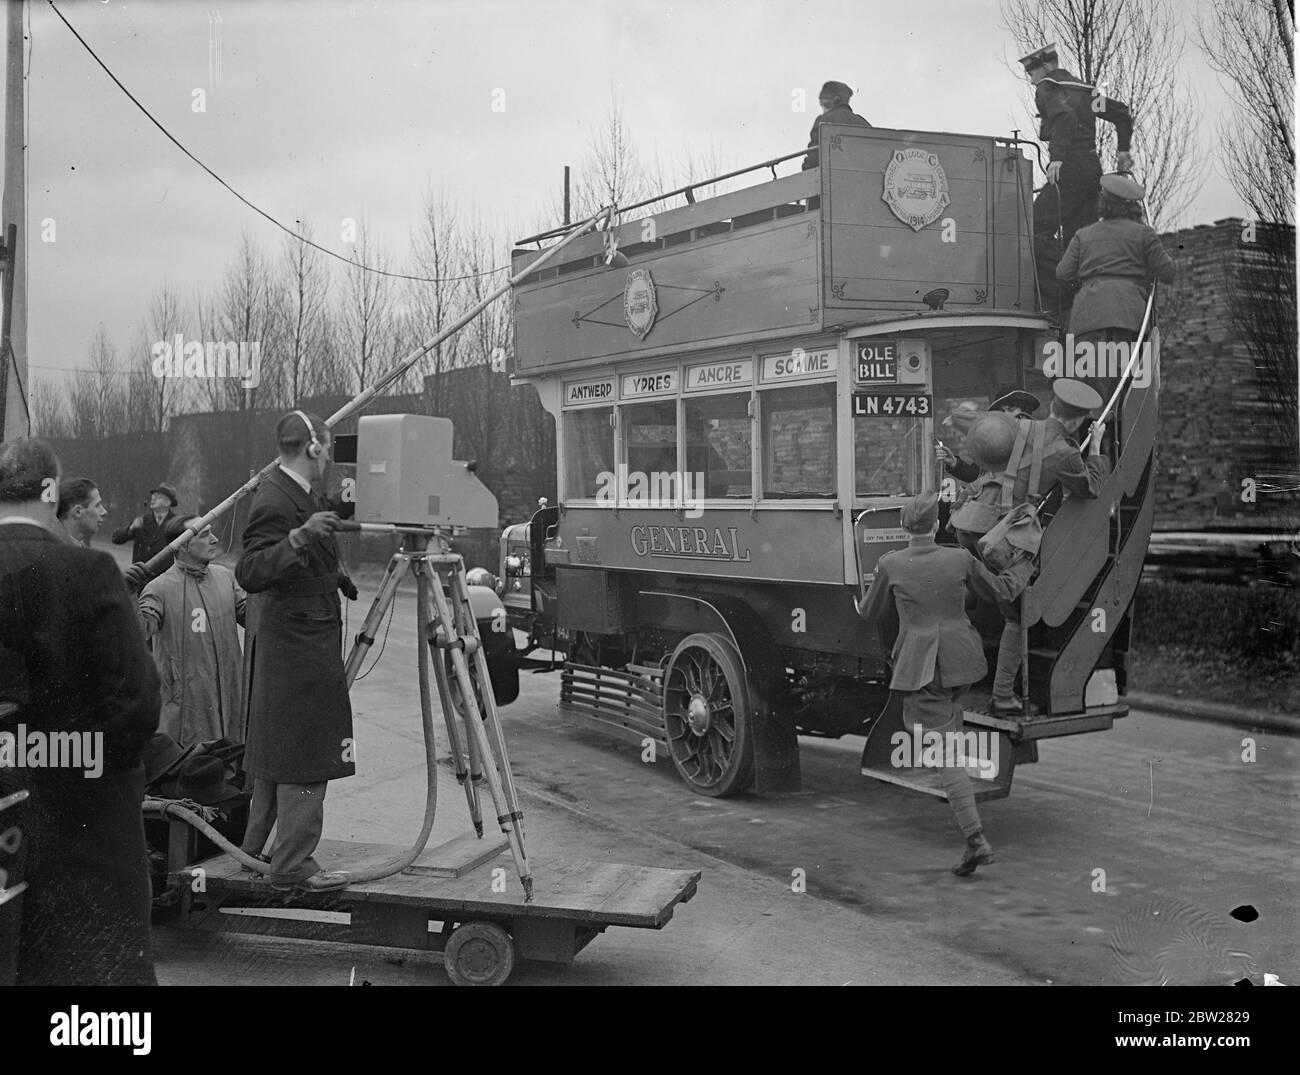 Famous wartime bus televised in pageant of transport at Chiswick. London's buses, from the old horse-drawn vehicles to 'Old Bill' and the modern Leviathans seating over 60 people, were televised in a 'Pageant of Transport' at London transport's Chiswick depot. The buses, which were manned by men in appropriate costume, were brought from London transport's own museum. Photo shows, 'Old Bill', the bus which carried thousands of British troops during the great War, being televised at Chiswick. 14 January 1938 Stock Photo